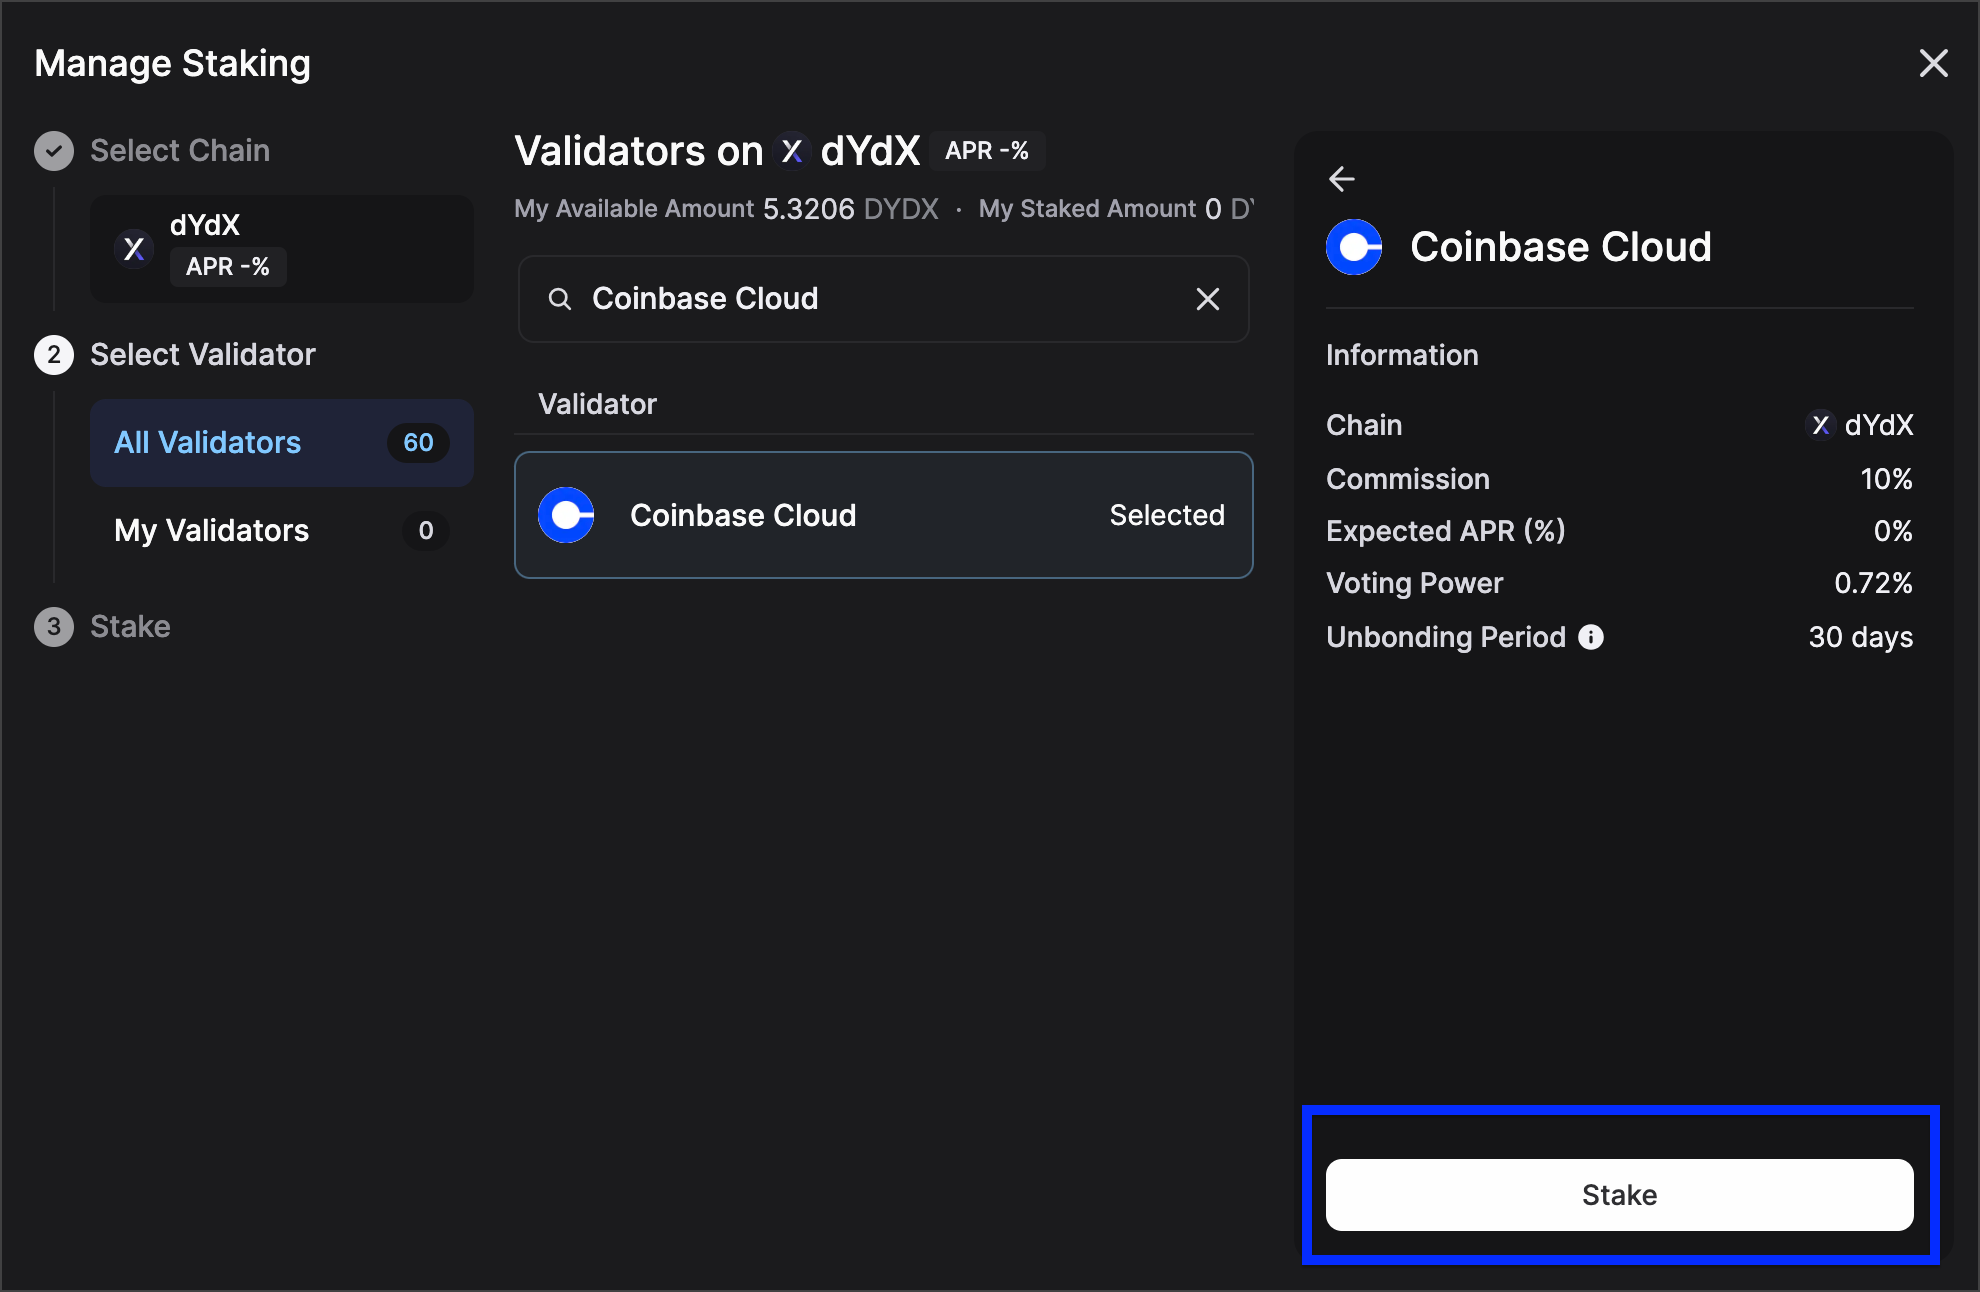 When you select the Coinbase validator, the delegation details display on the right and the Stake button displays underneath.